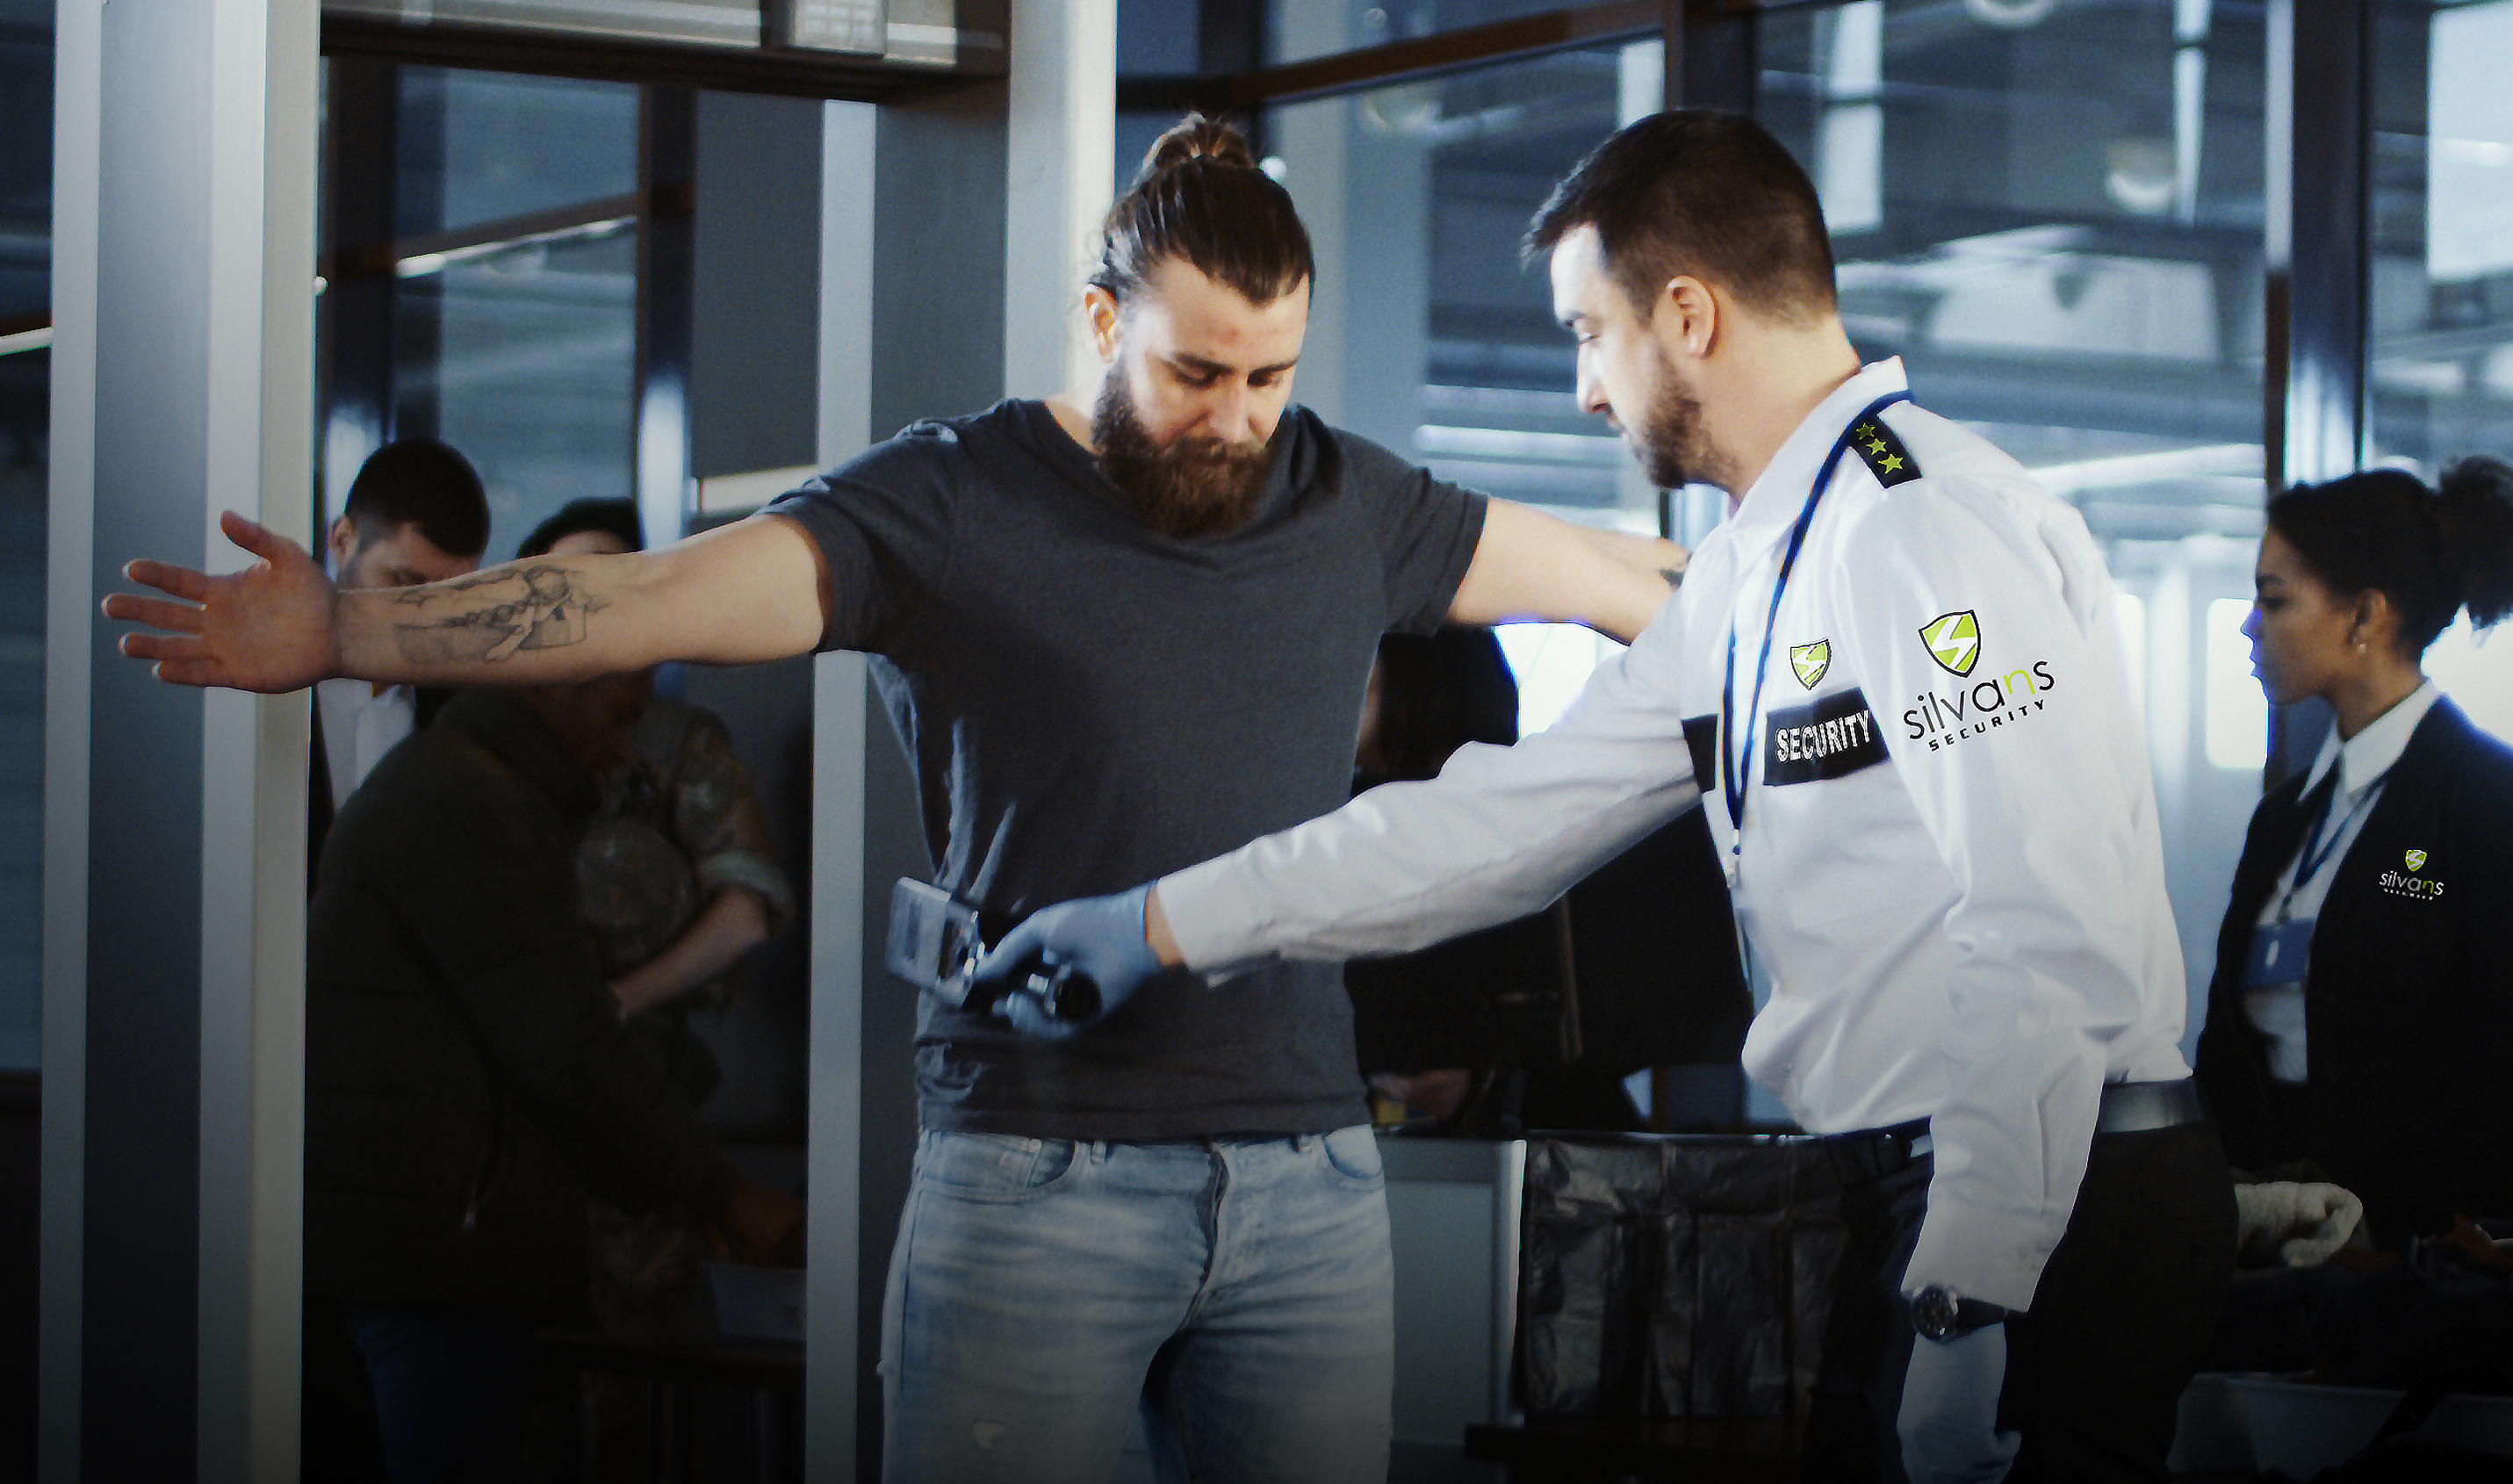  Security Services in Australia and New Zealand